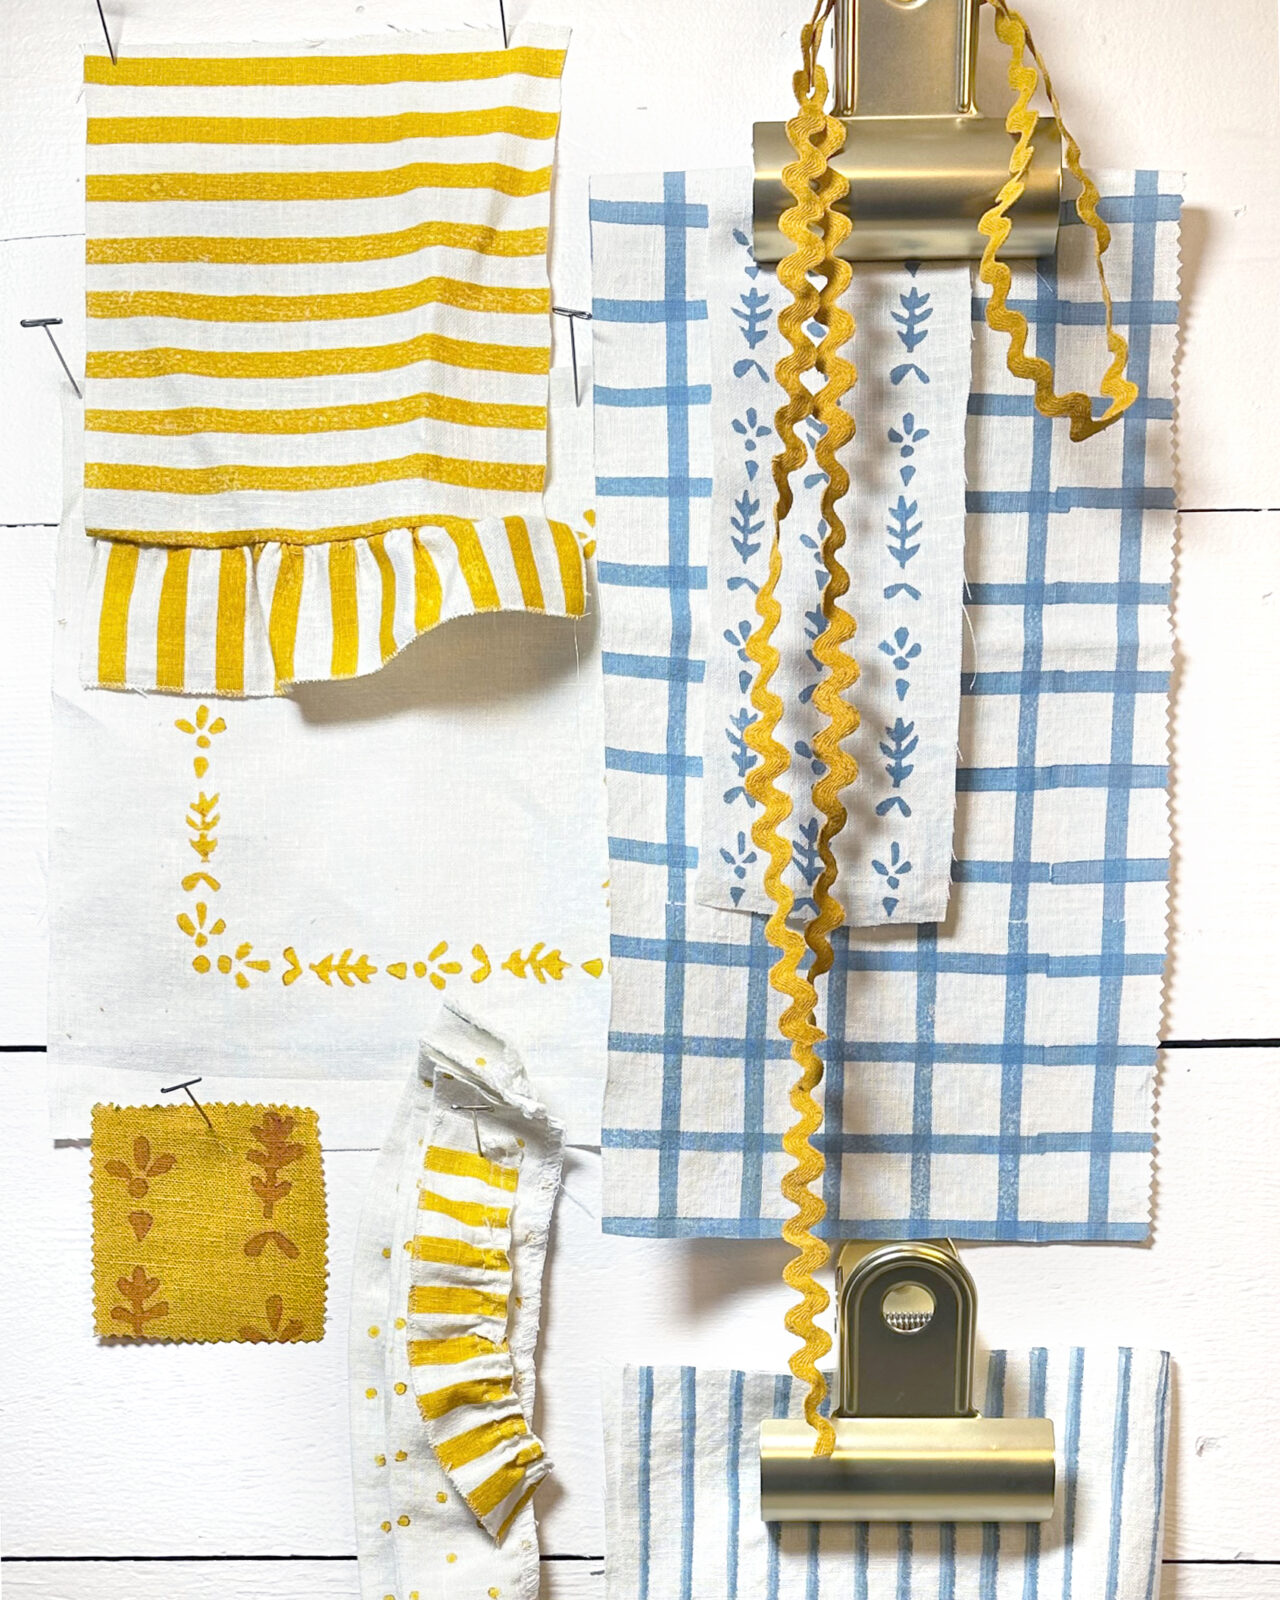 A variety of fabric samples in blue, yellow, and white colors are pinned up on a wall.